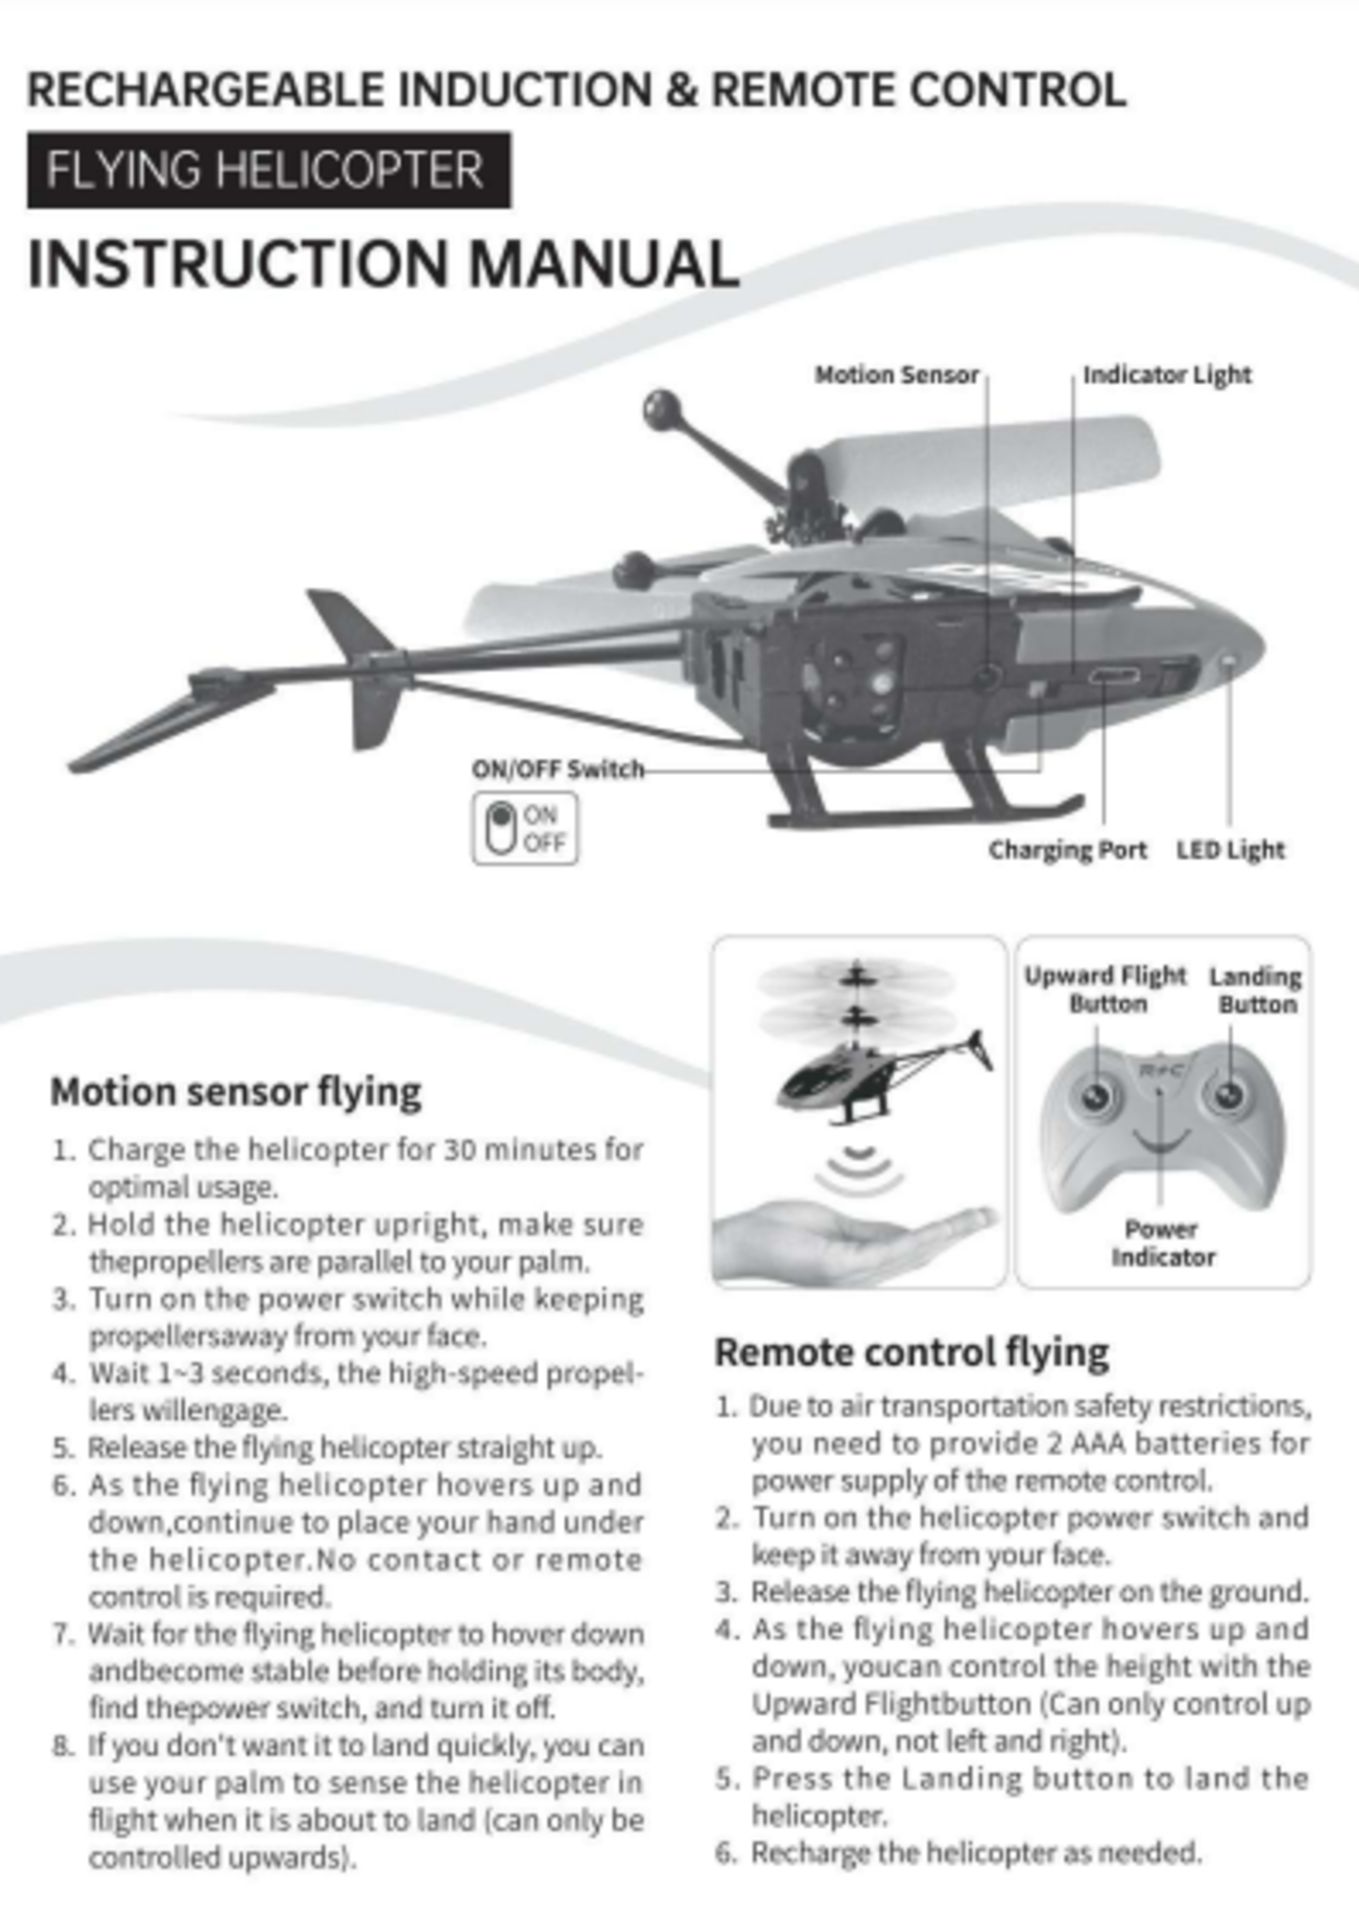 Remote Control Intelligent Induction Combat Helicopter